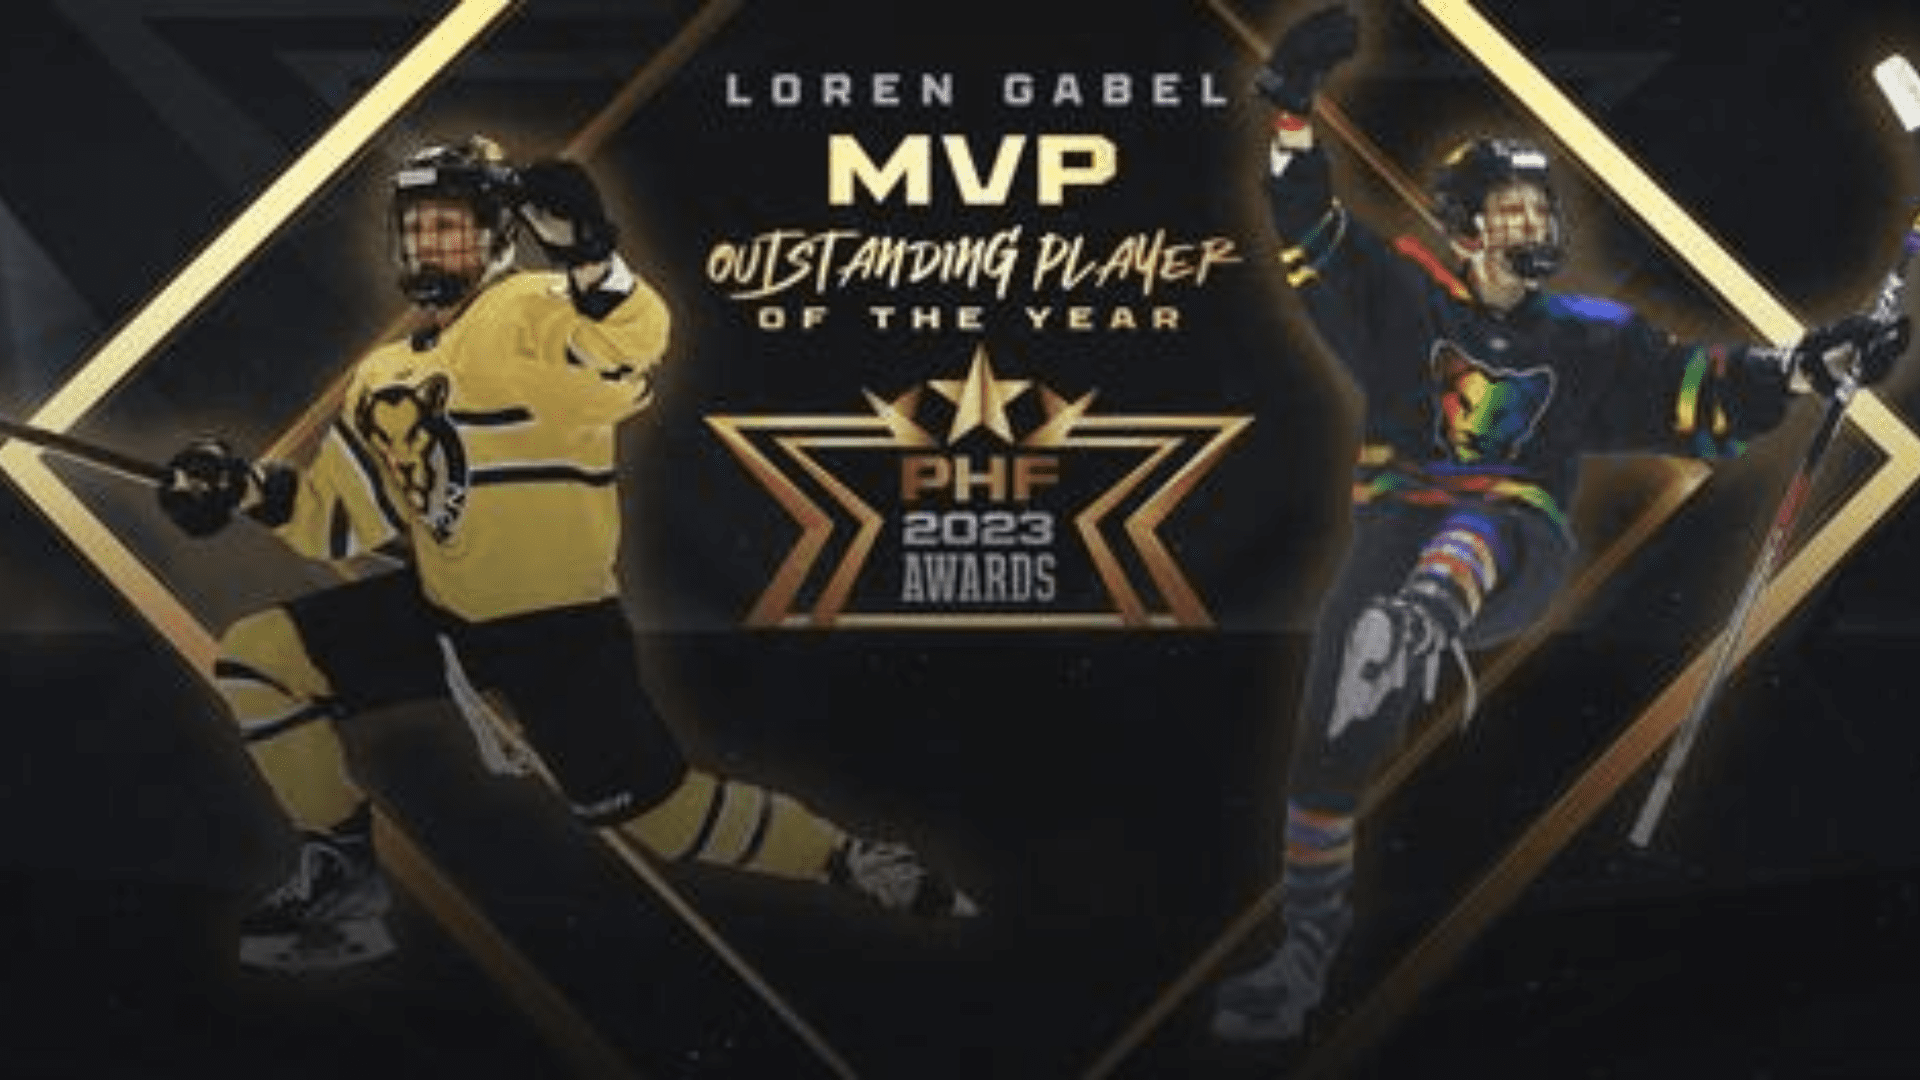 The WHL on X: Congratulations to the 22 players selected in the